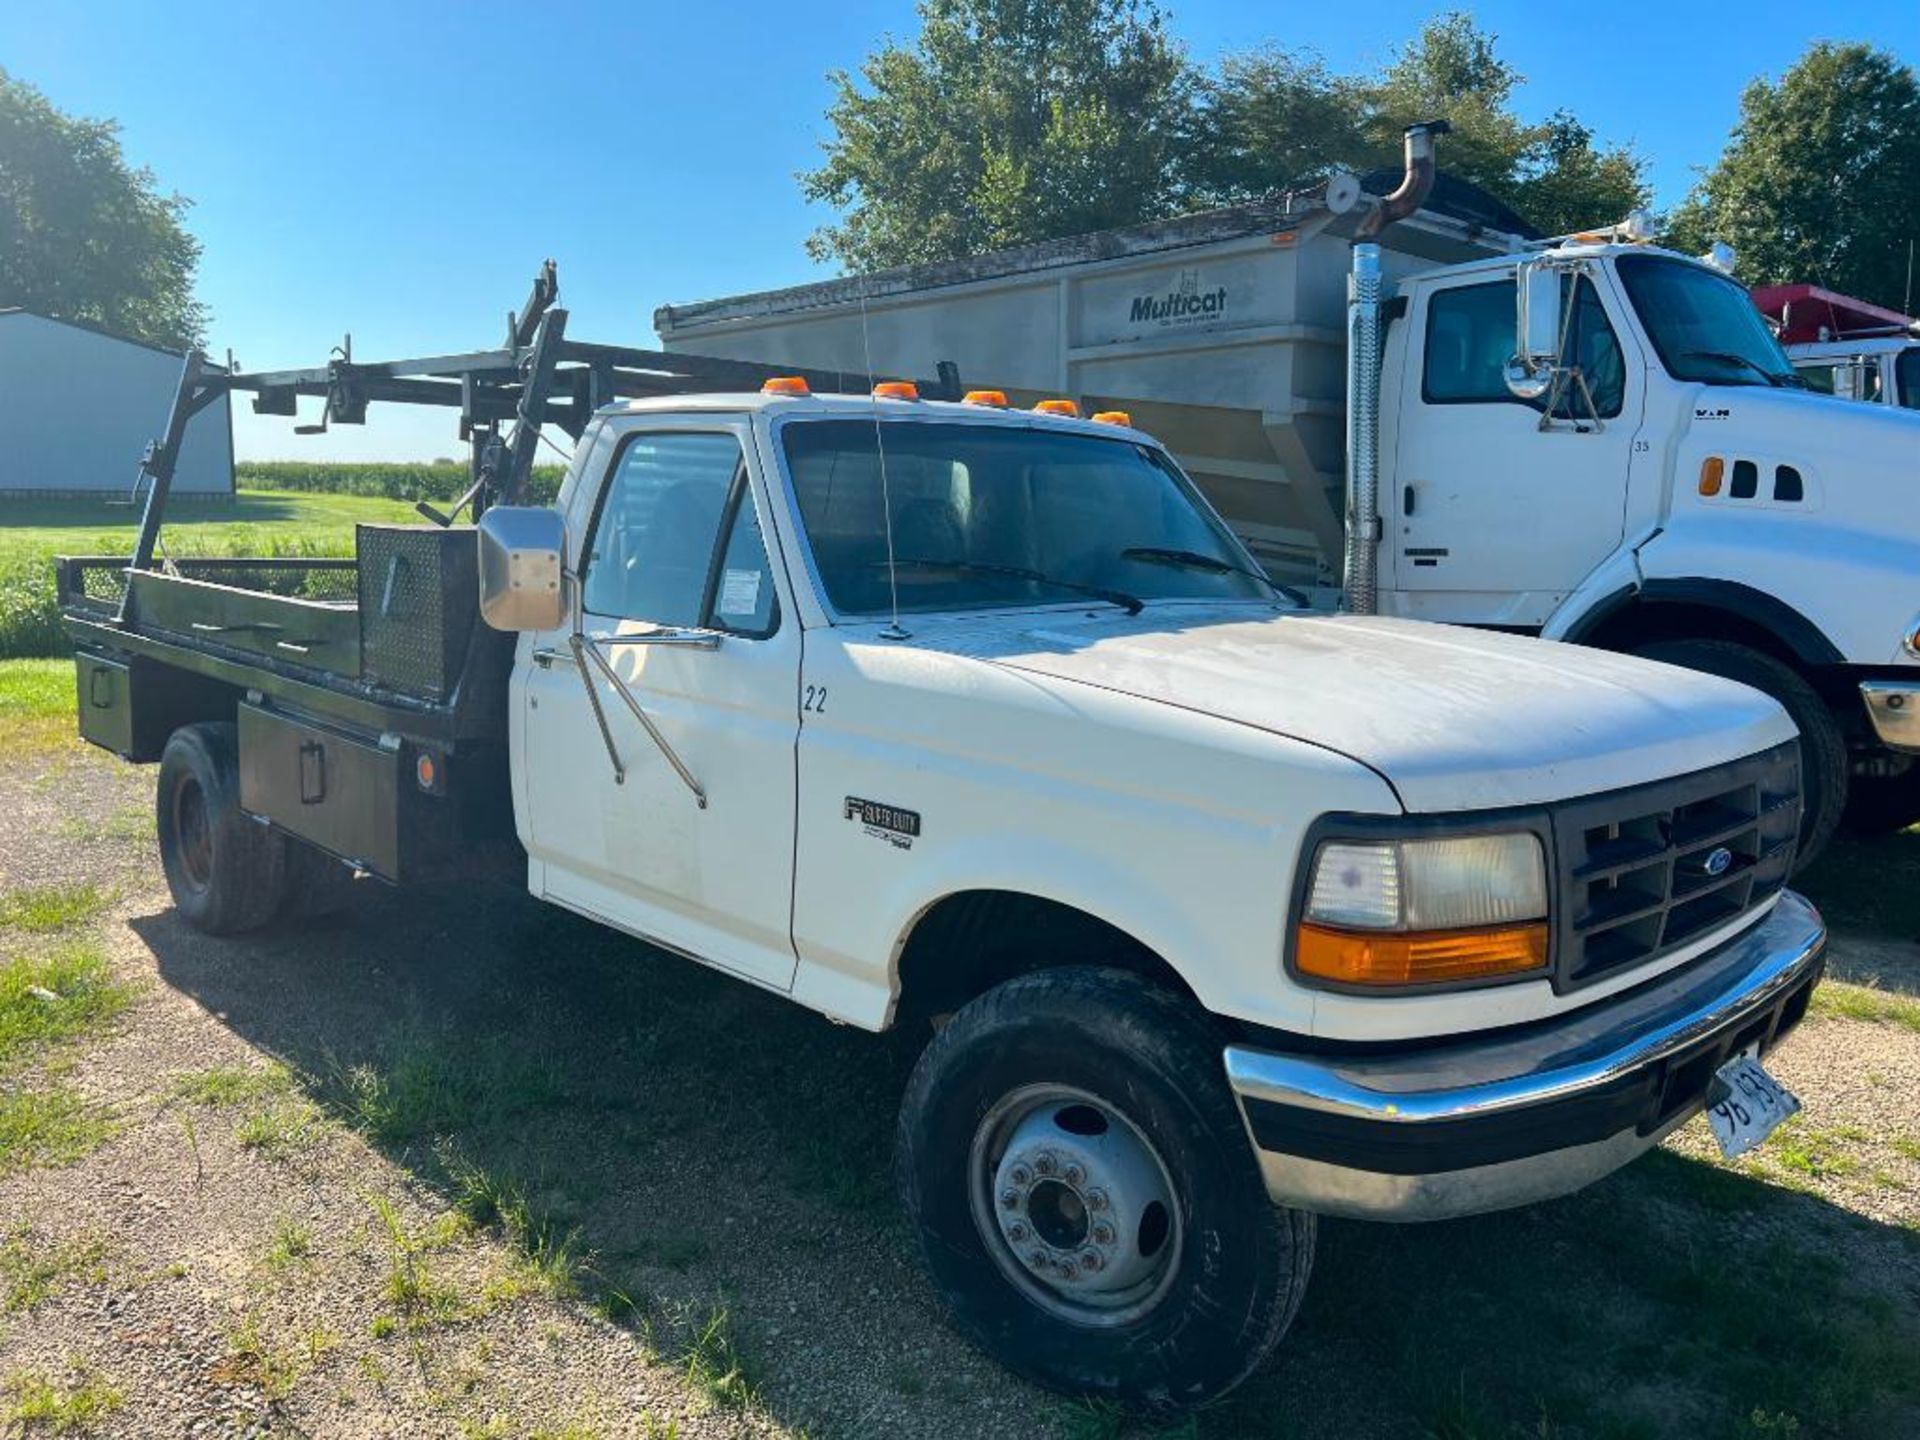 1995 Ford F450 Truck, VIN #1FDLF47F8SEA15618, Miles Unknown, 5 Speed Manual Transmission, 7.3 Diesel - Image 2 of 17